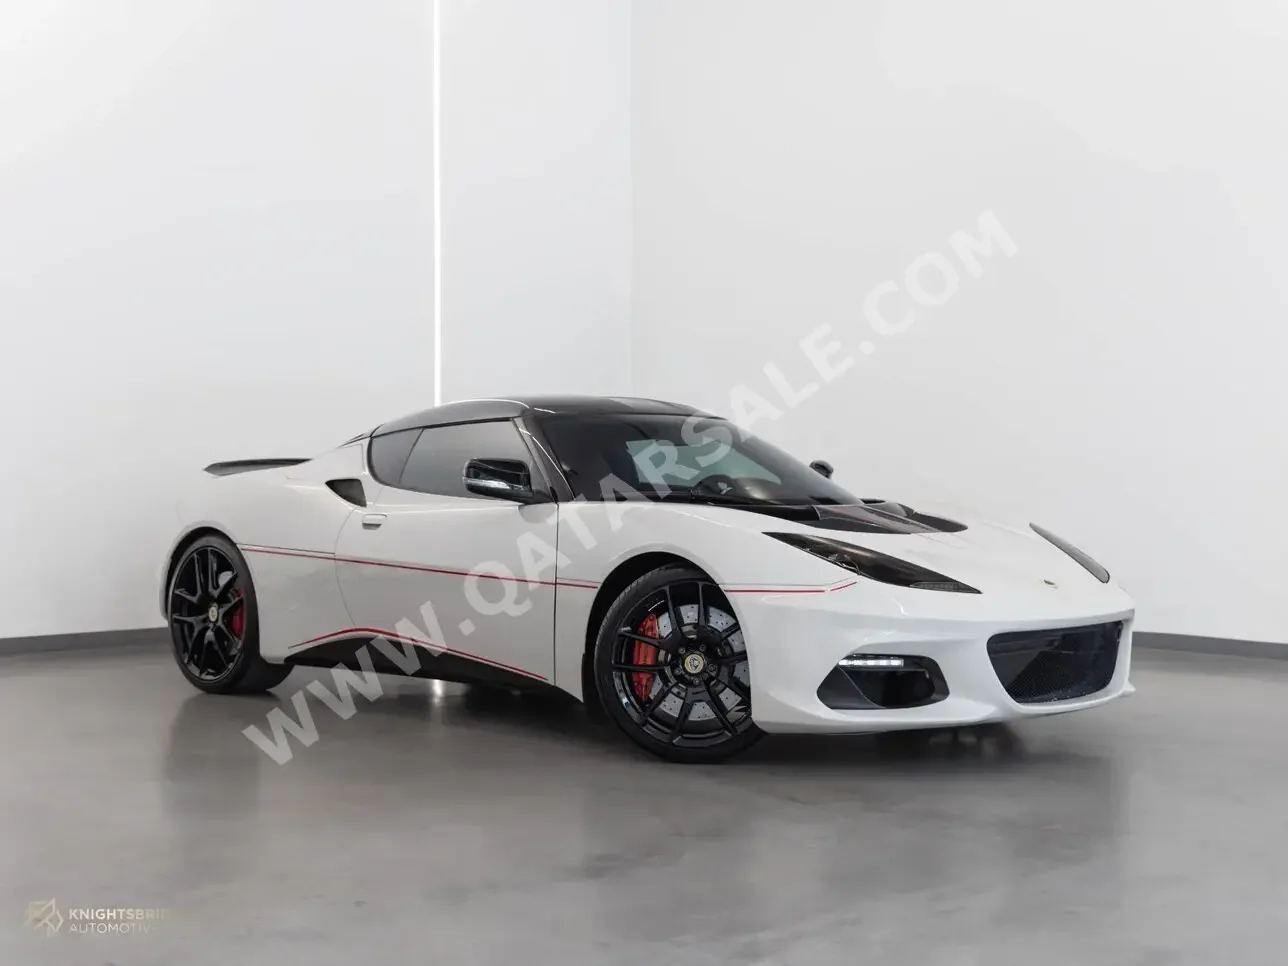 Lotus  Evora  410  2019  Automatic  45,500 Km  4 Cylinder  Rear Wheel Drive (RWD)  Coupe / Sport  White